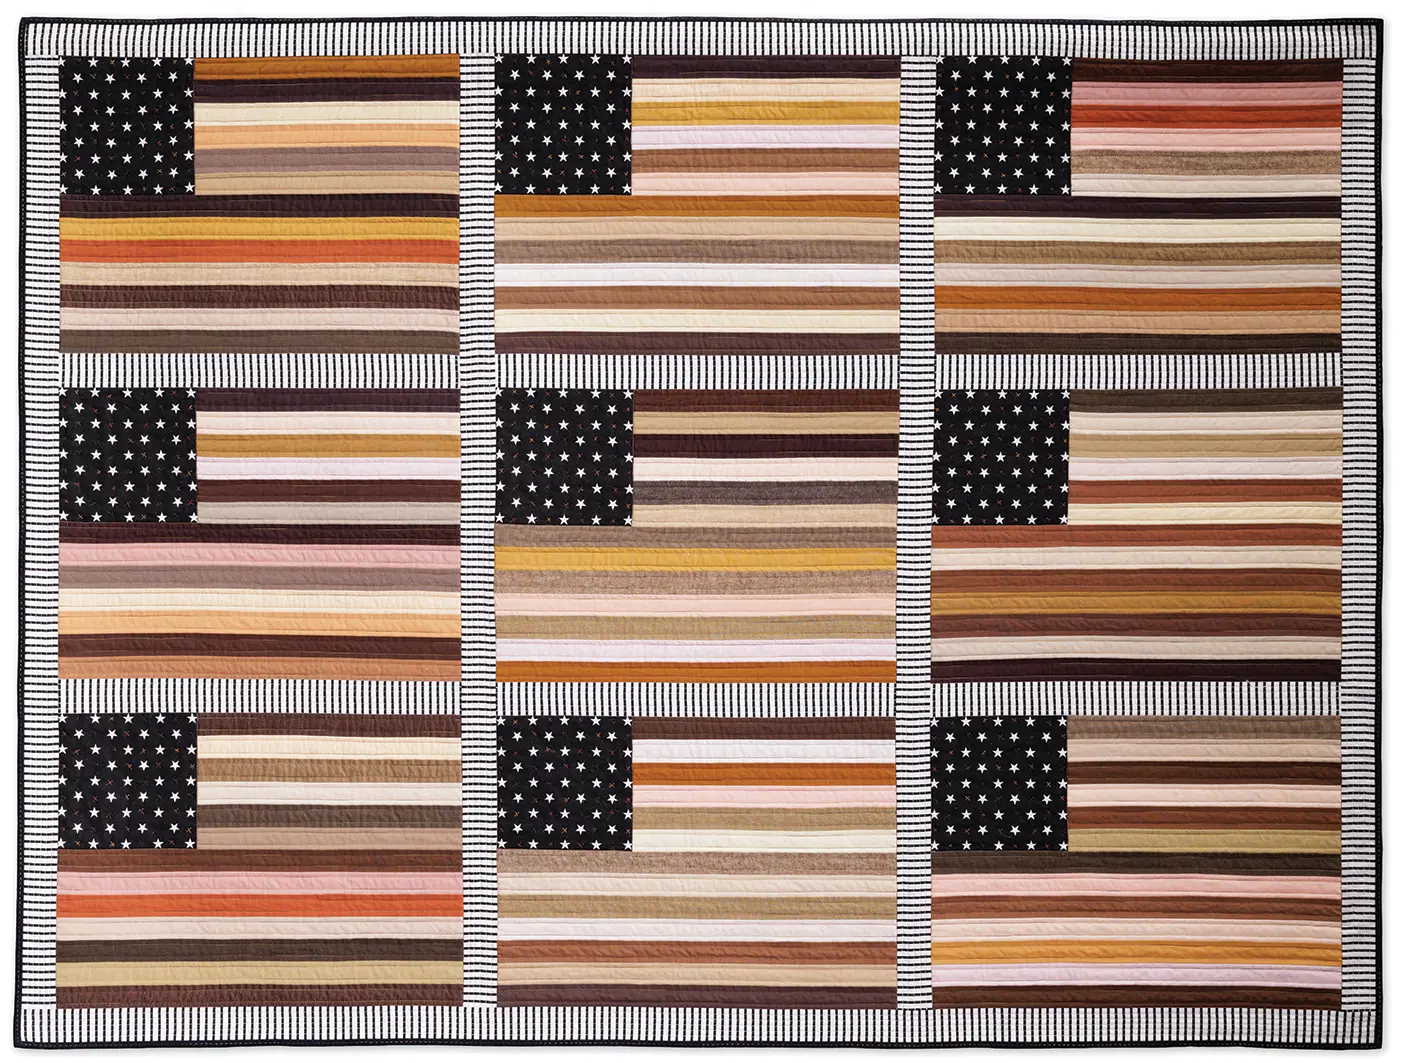 A patchwork quilt made of nine American flags in a square grid. The stripes of each flag feature various hues of brown, red, orange, and beige, representing various diverse skin tones.